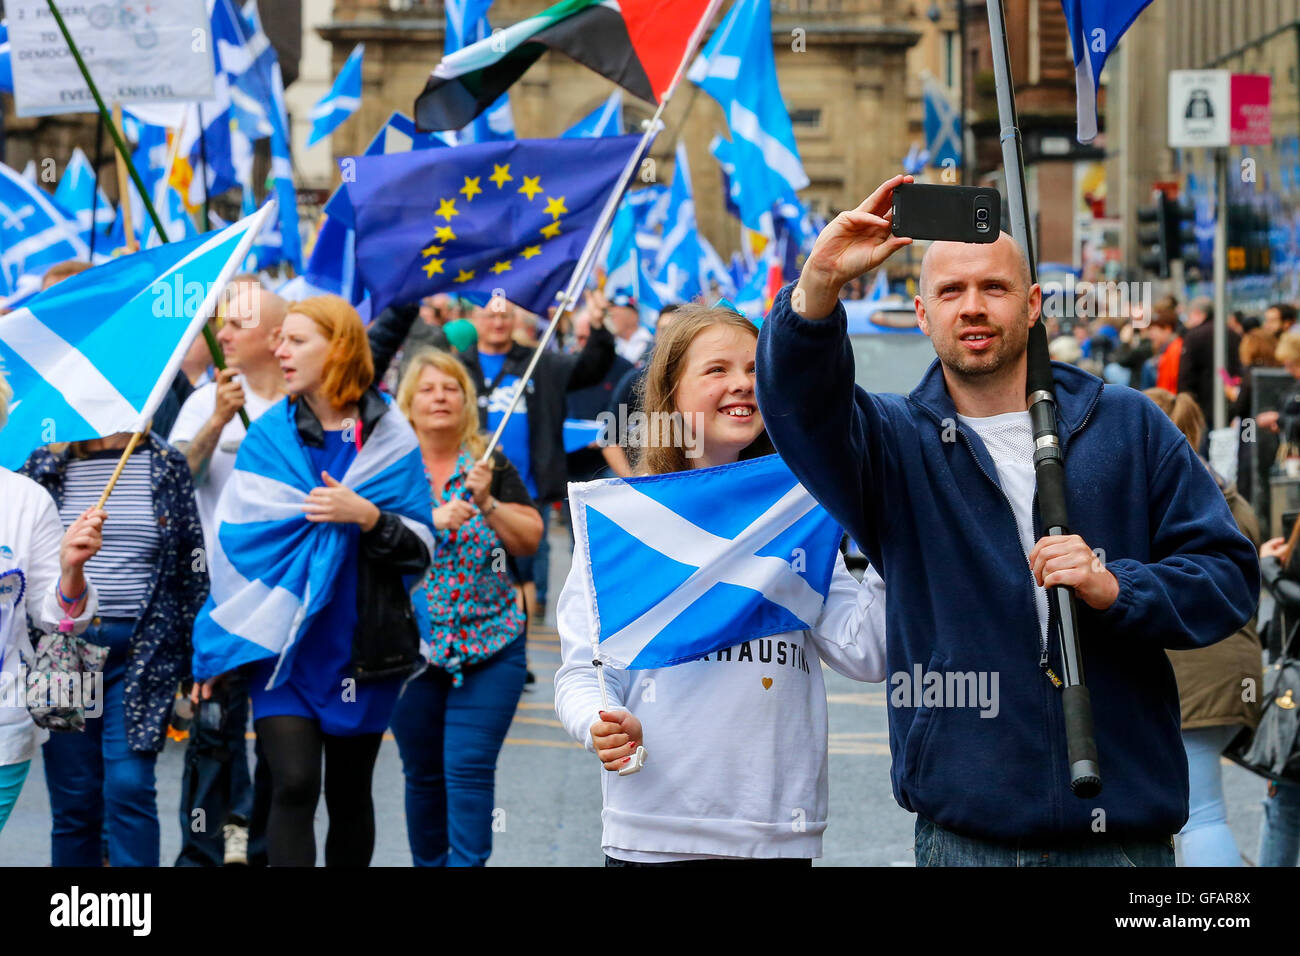 Glasgow, UK. 30th July, 2016. Several thousand people including approximately 100 motorcycles in a rally, took part in a Pro-Independence March through Glasgow, UK, finishing with speeches in George Square in the city centre. 'Under One Banner' is a collective of many smaller groups including 'Yes2', 'Anti-Trident', 'CND' 'Anti-Tory', and similar other pressure groups who support respective aspects of the SNP's policies. Credit:  Findlay/Alamy Live News Stock Photo